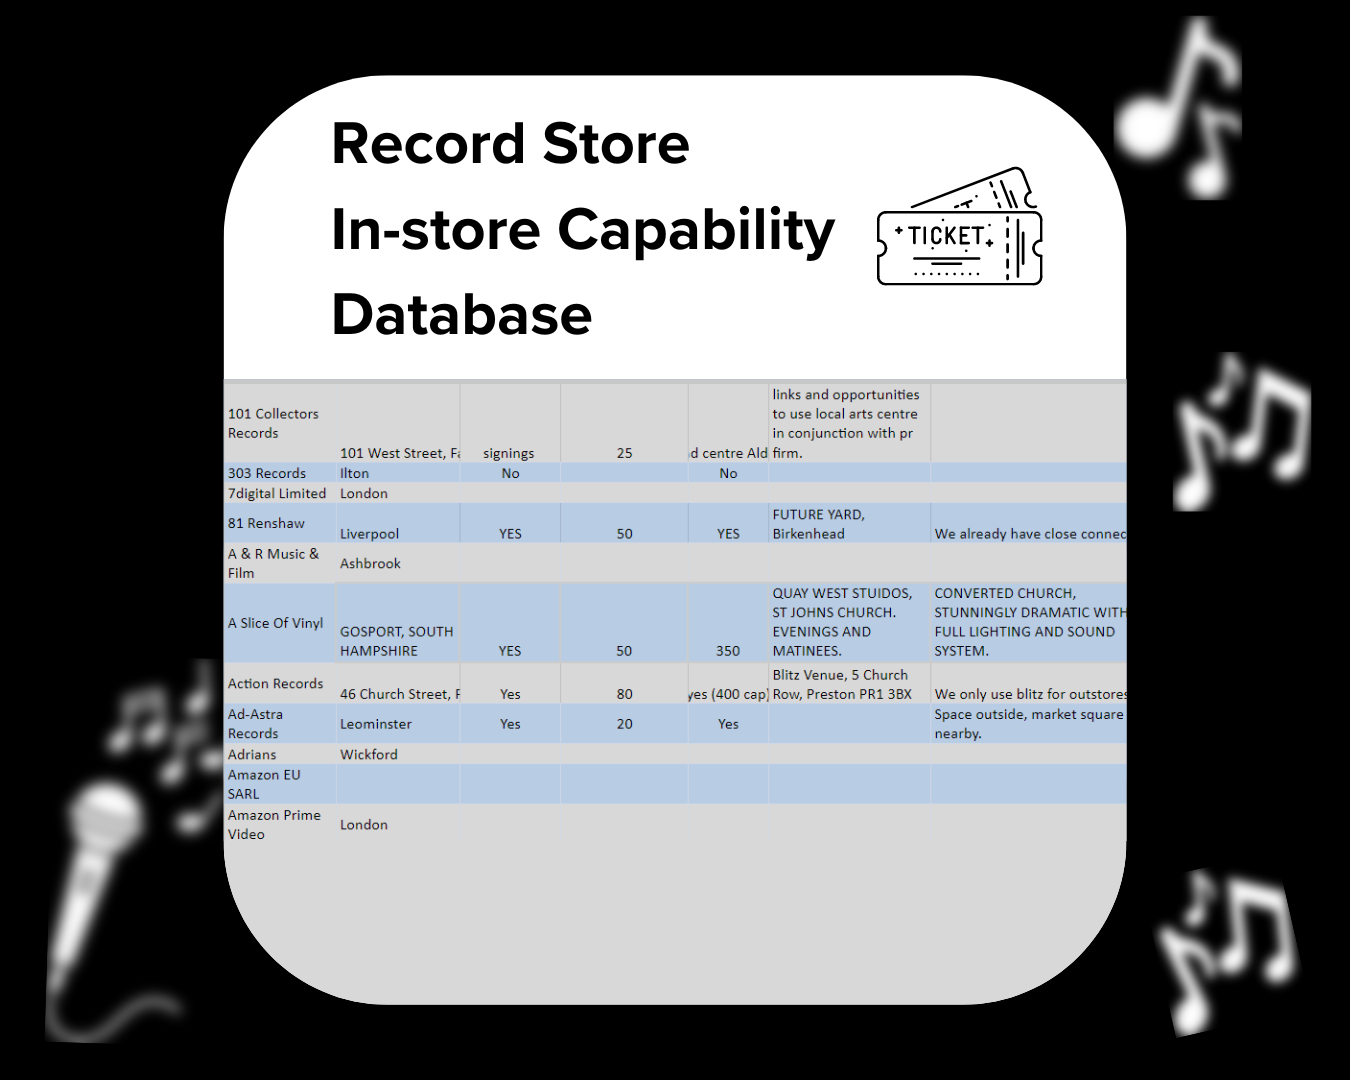 Record Store In-store Capability Database